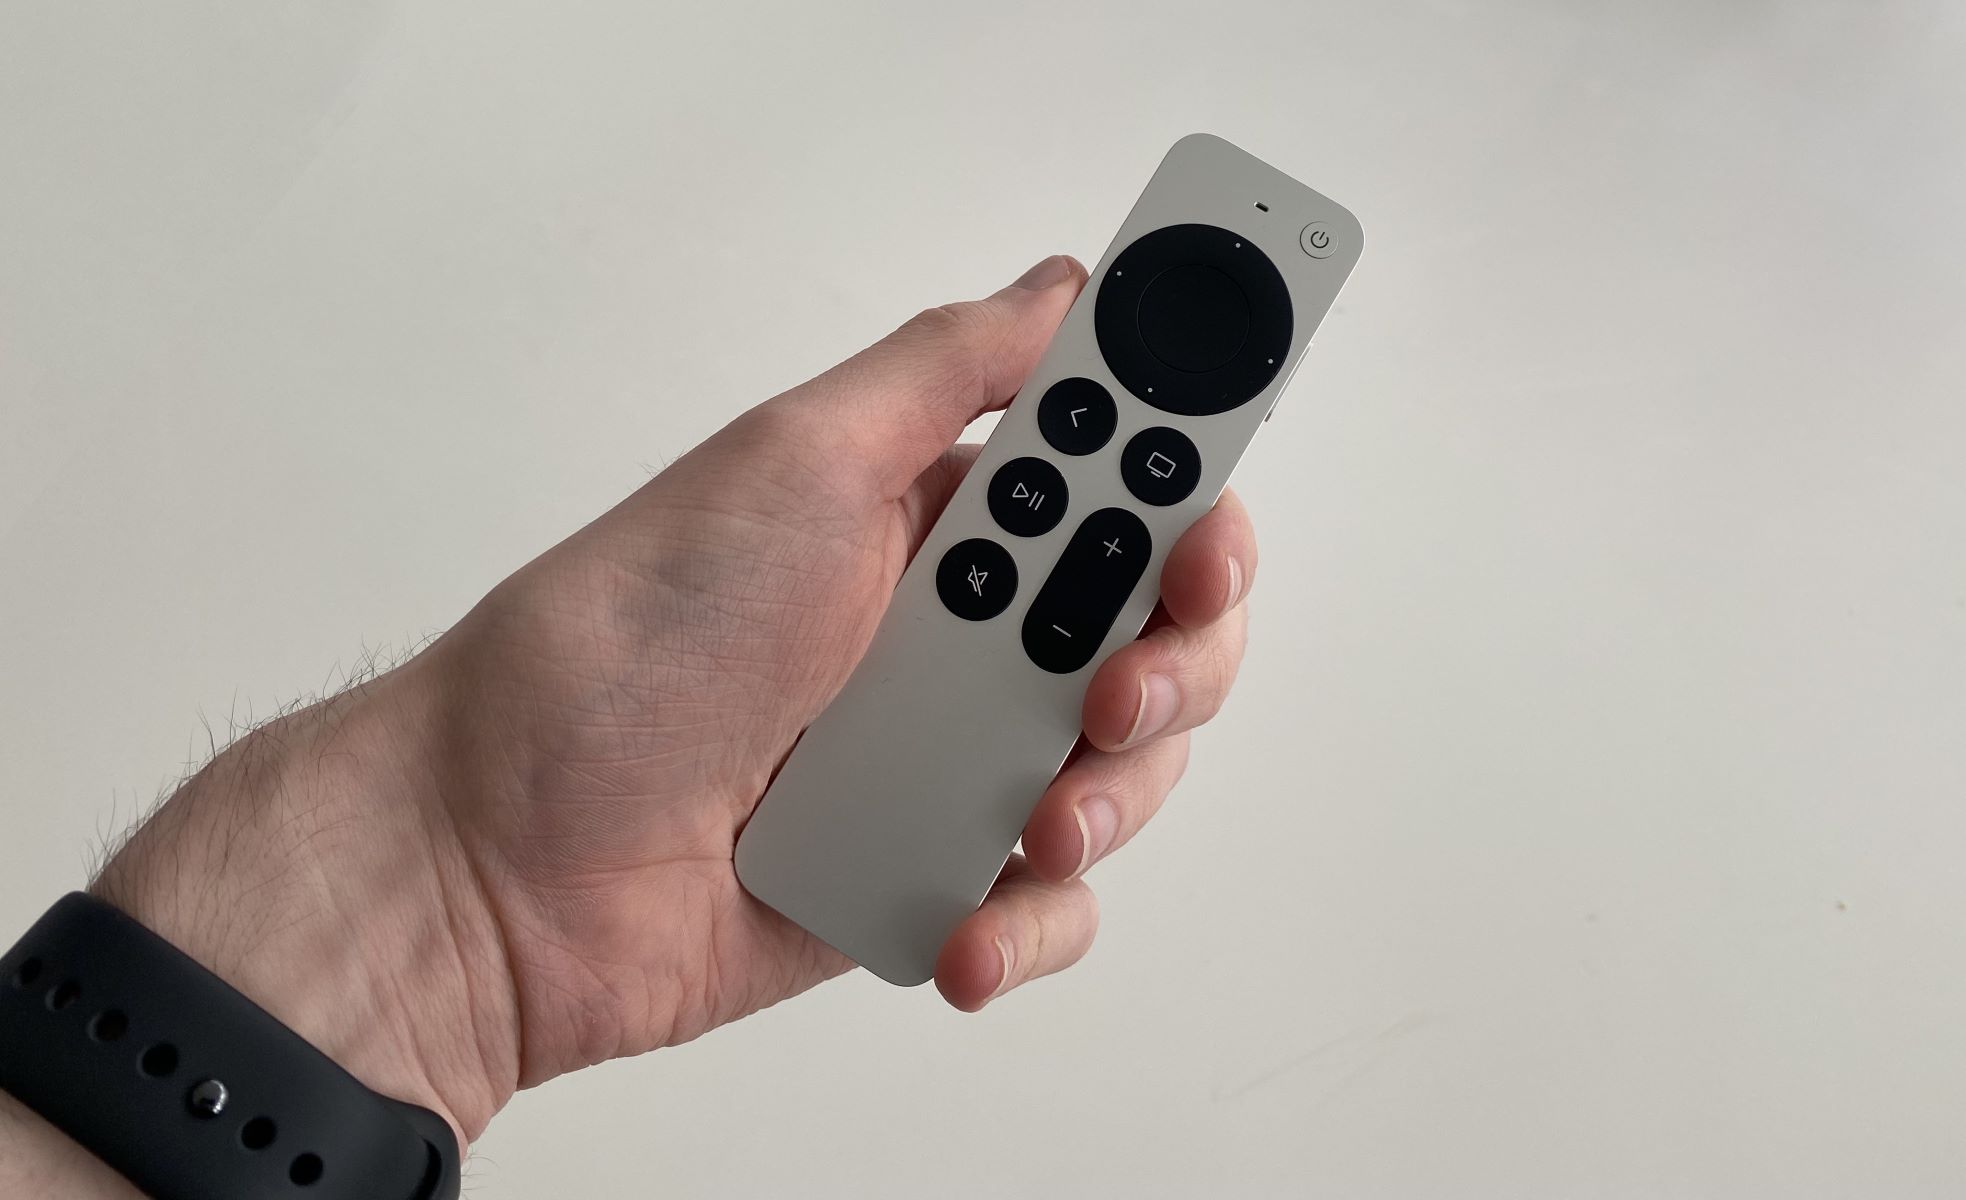 How To Pair Apple TV Remote